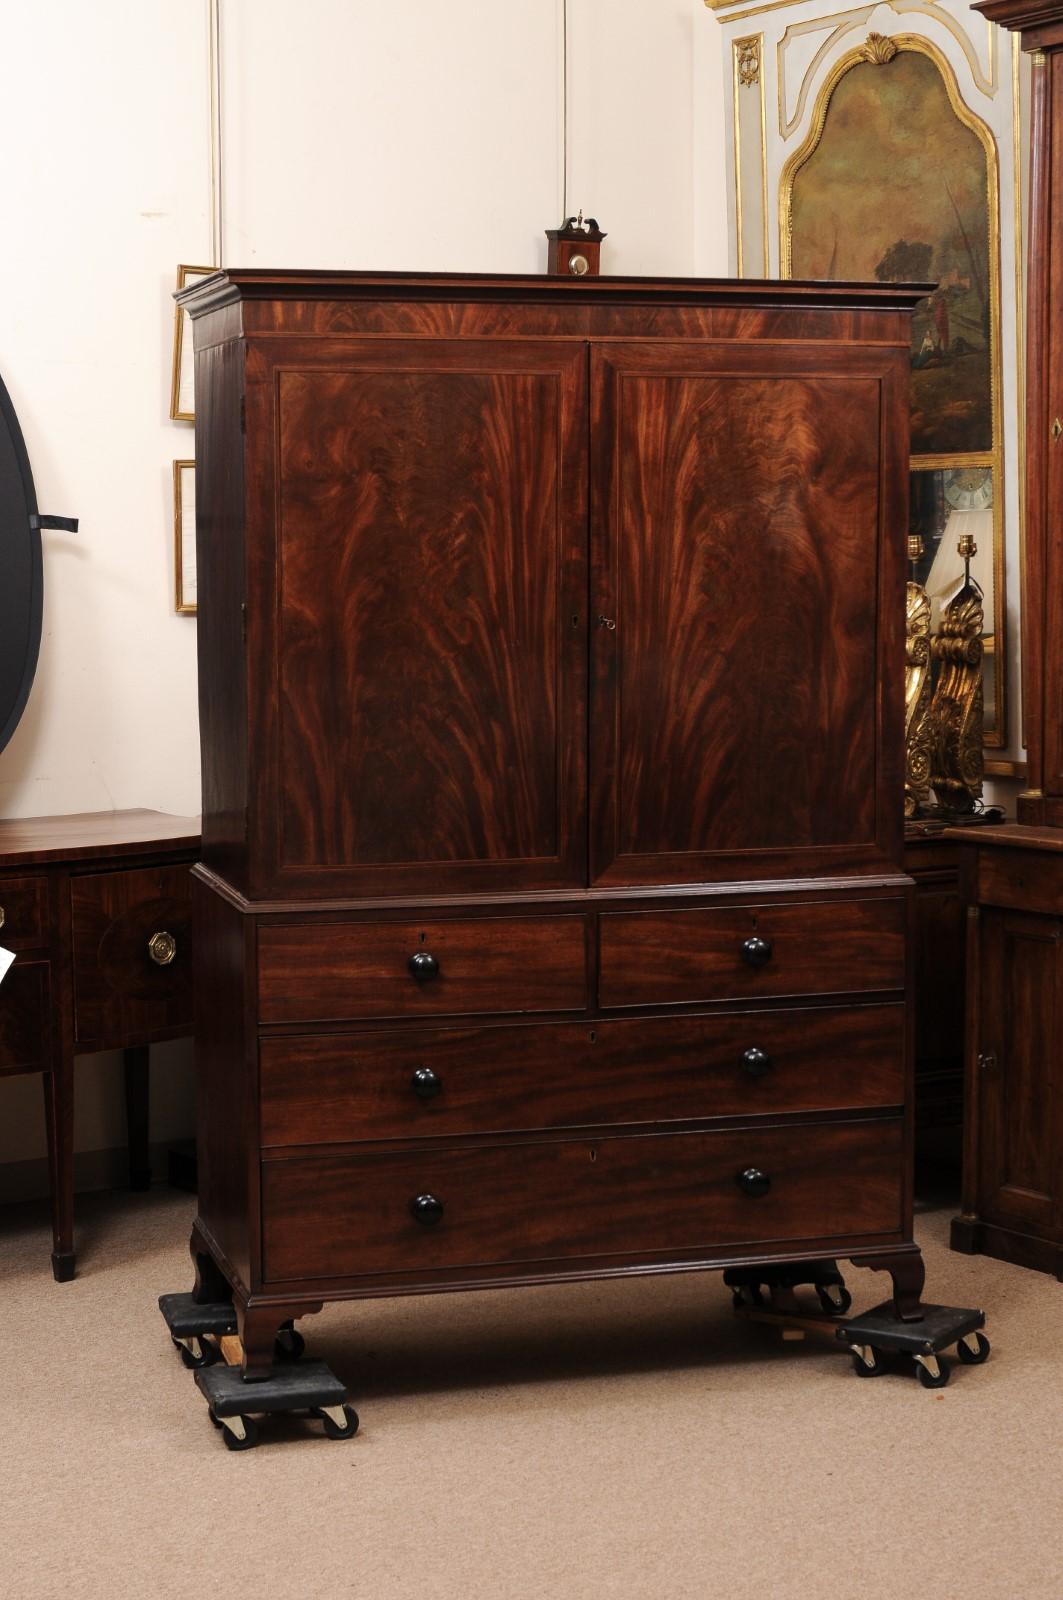 English 19th Century Figured Mahogany Linen Press with Flat Moulded Cornice, Ebonized Wooden Pulls and Splayed Feet